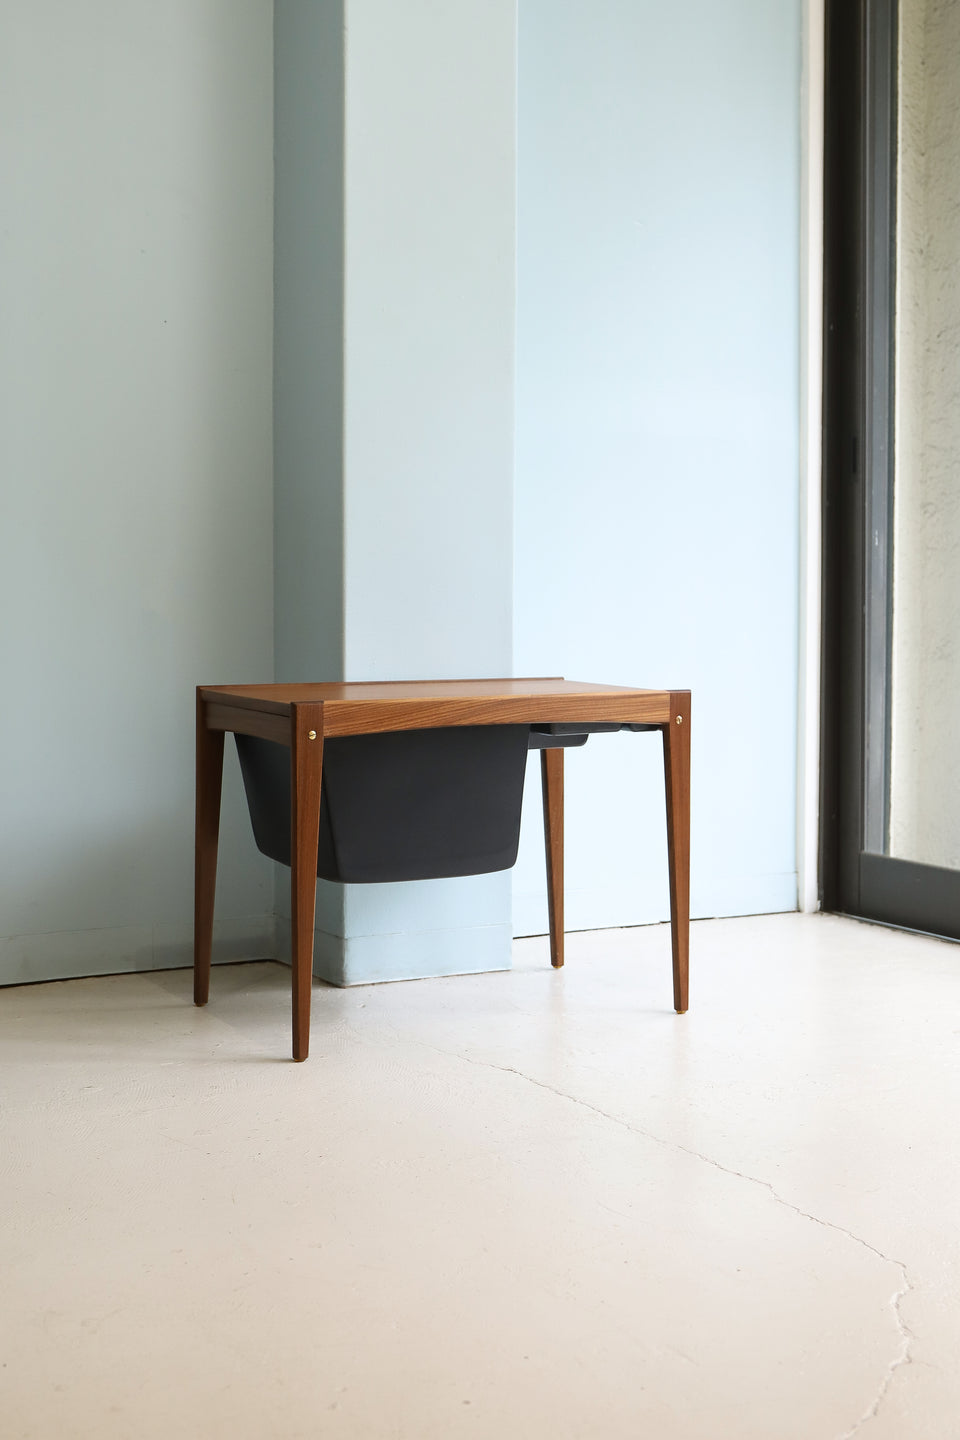 Danish Vintage Sewing Side Table/デンマークヴィンテージ ソーイング サイドテーブル 北欧家具